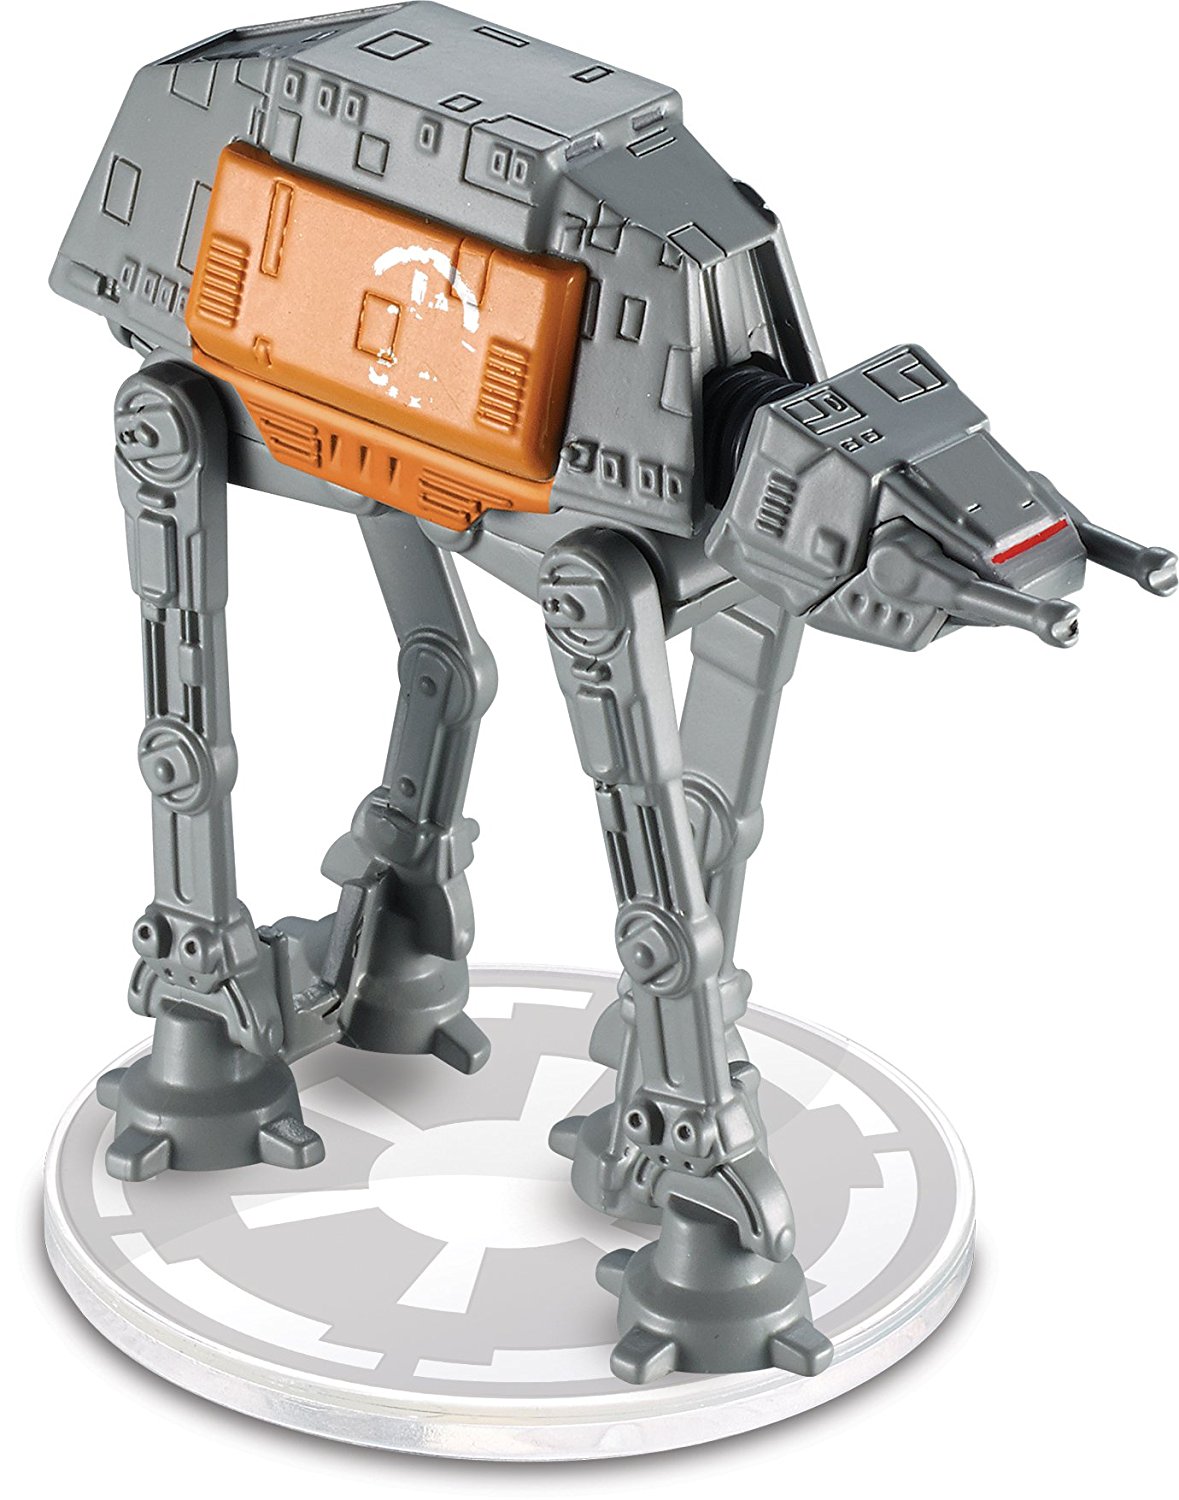 Imperial AT-ACT Cargo Walker